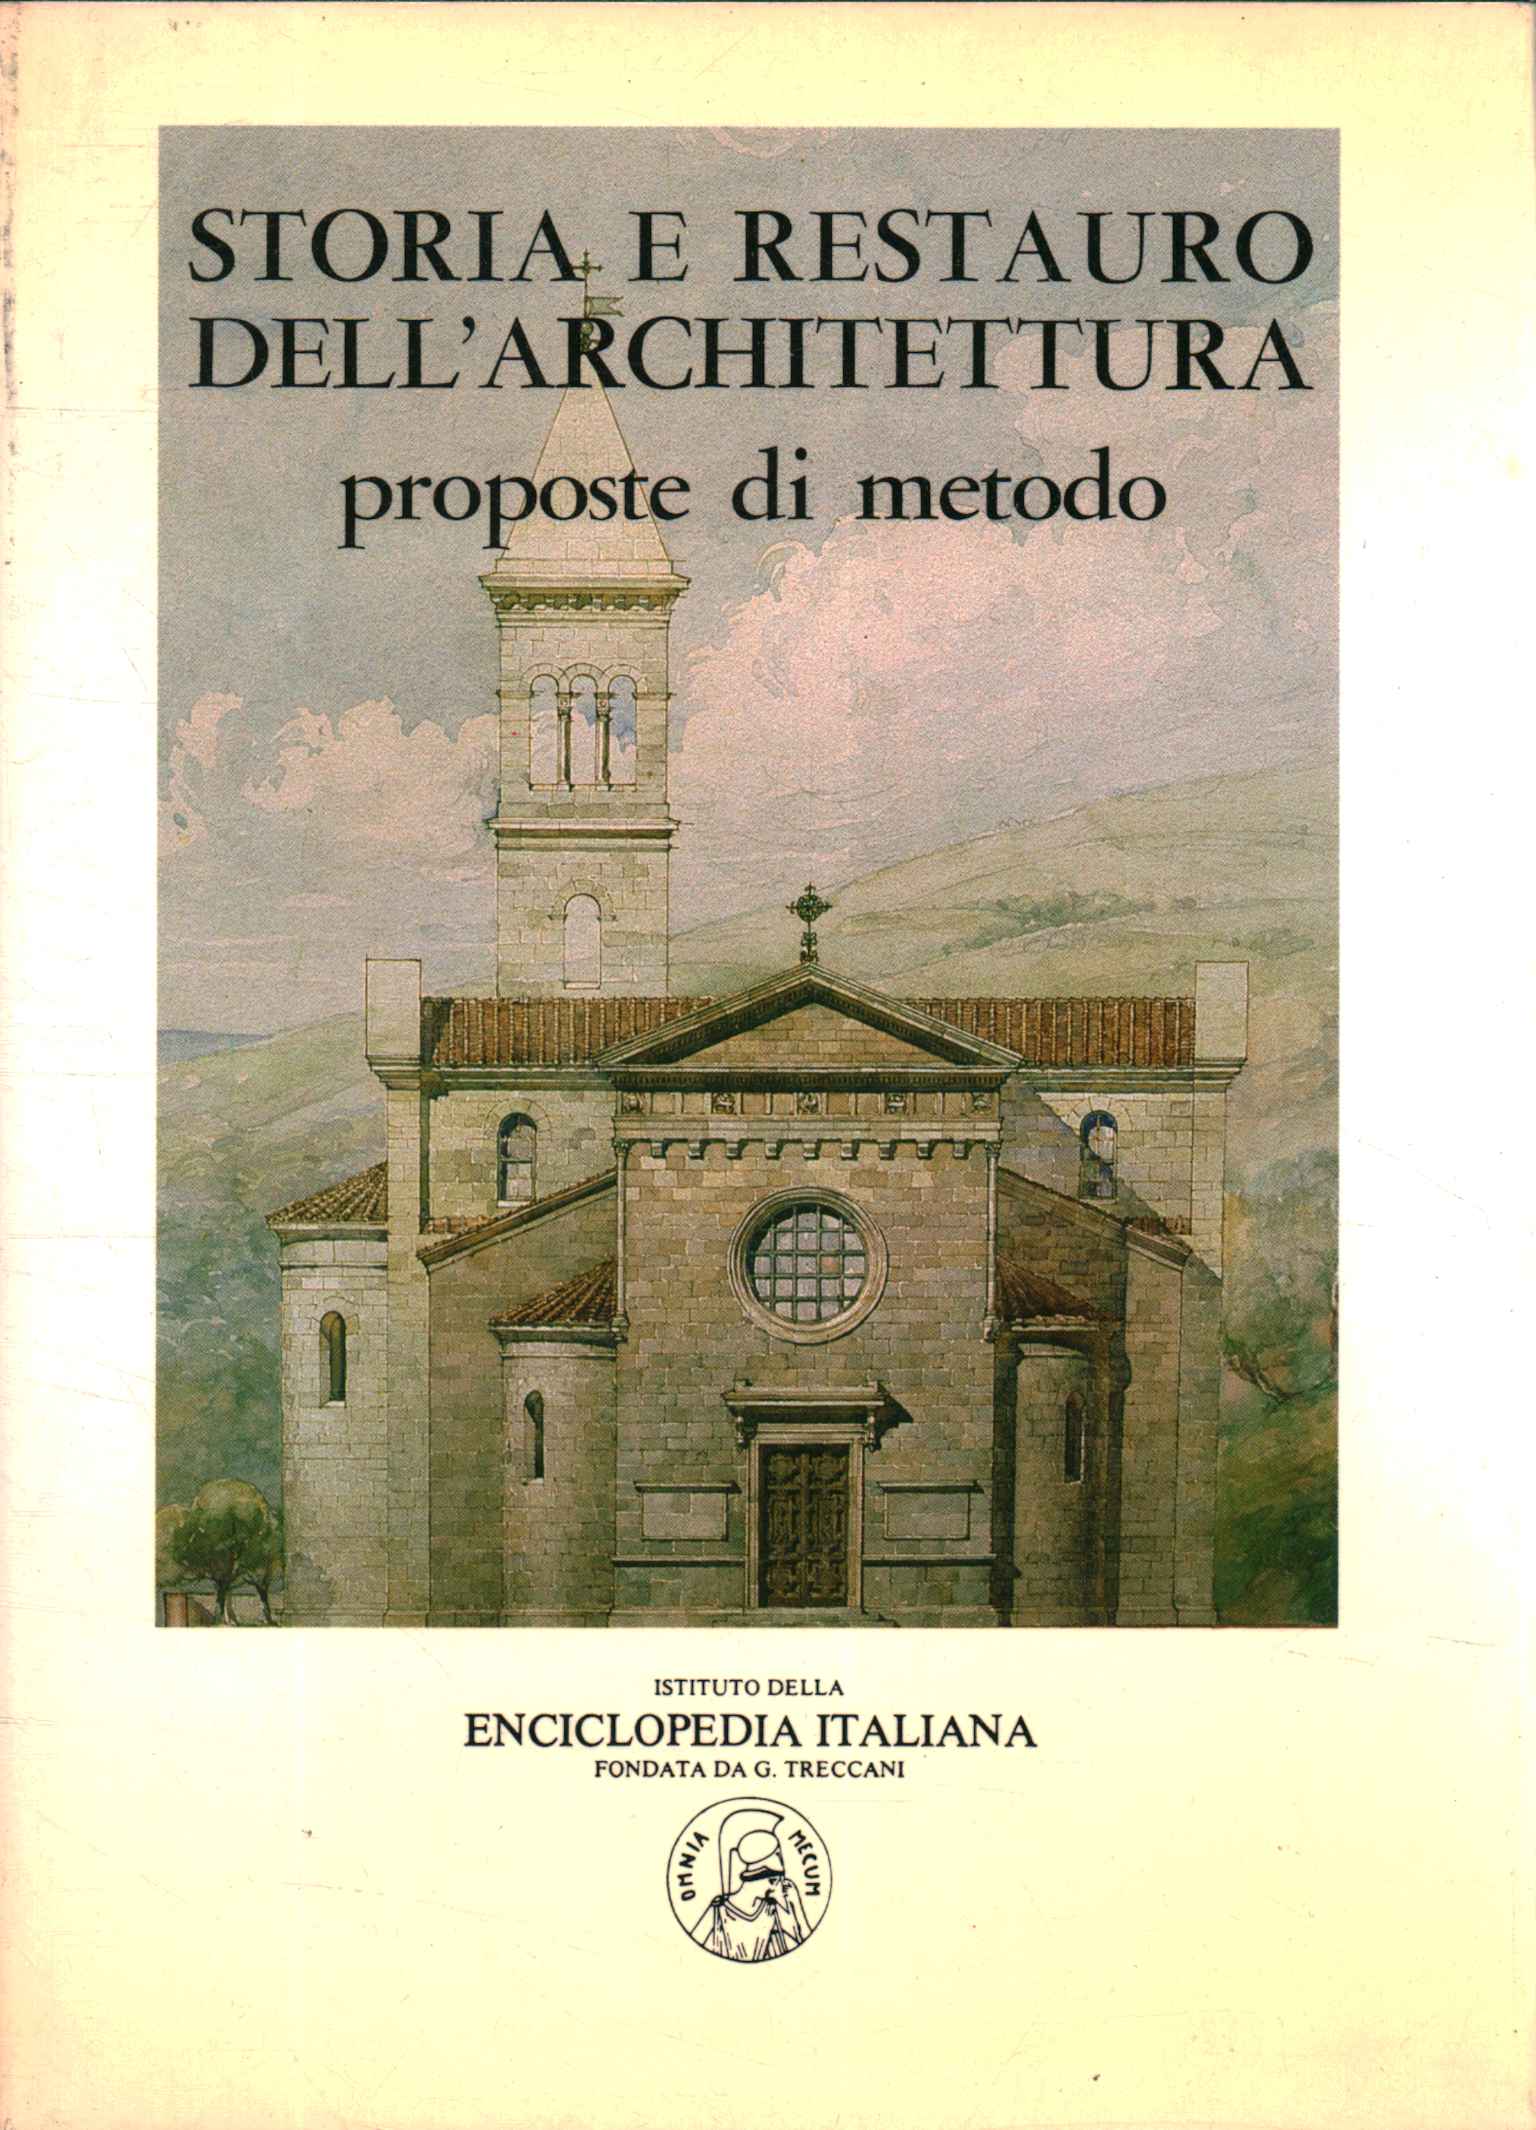 History and restoration of architecture